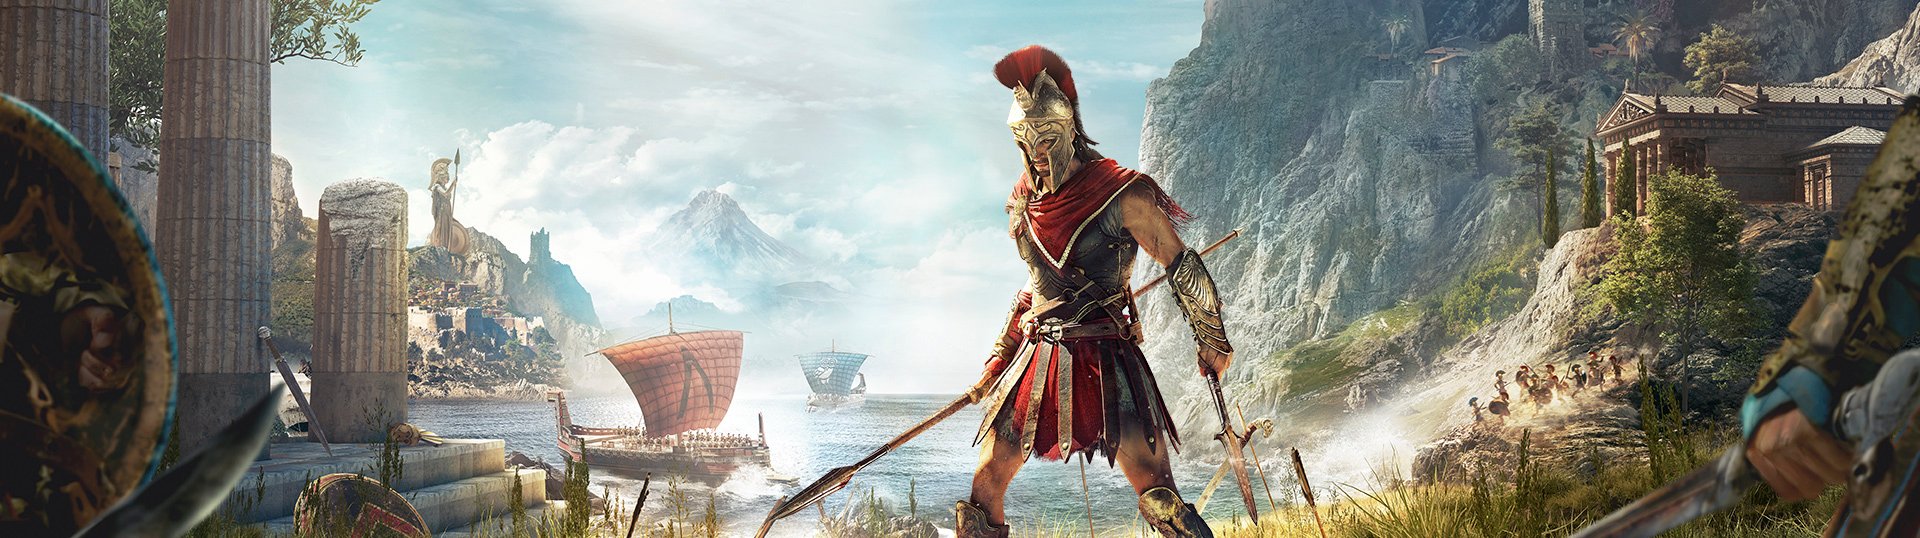 Assassin's Creed® Odyssey Standard Edition para PC